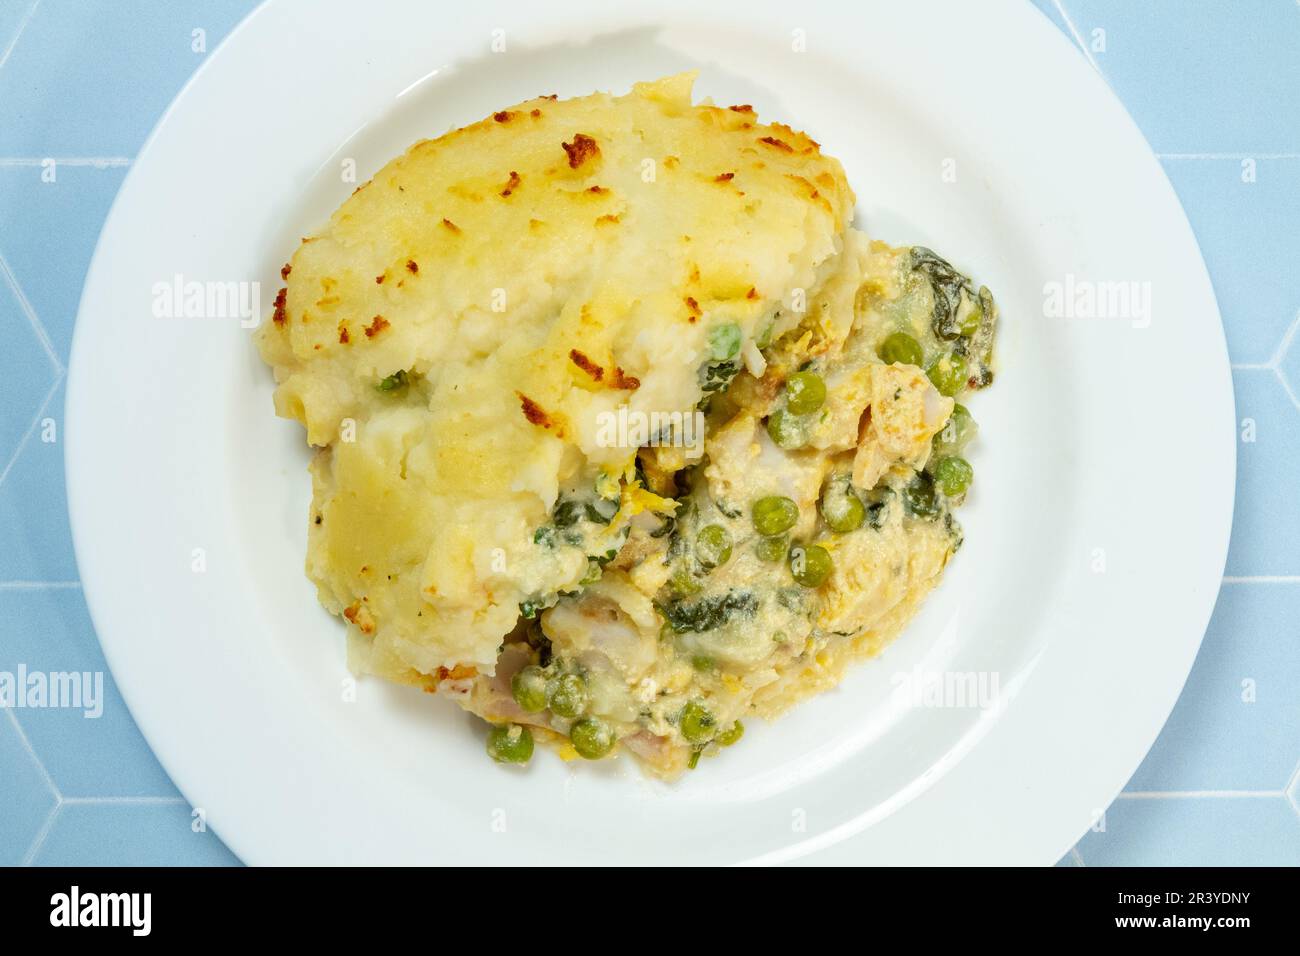 Easy fish pie with peas and spinach, from above Stock Photo